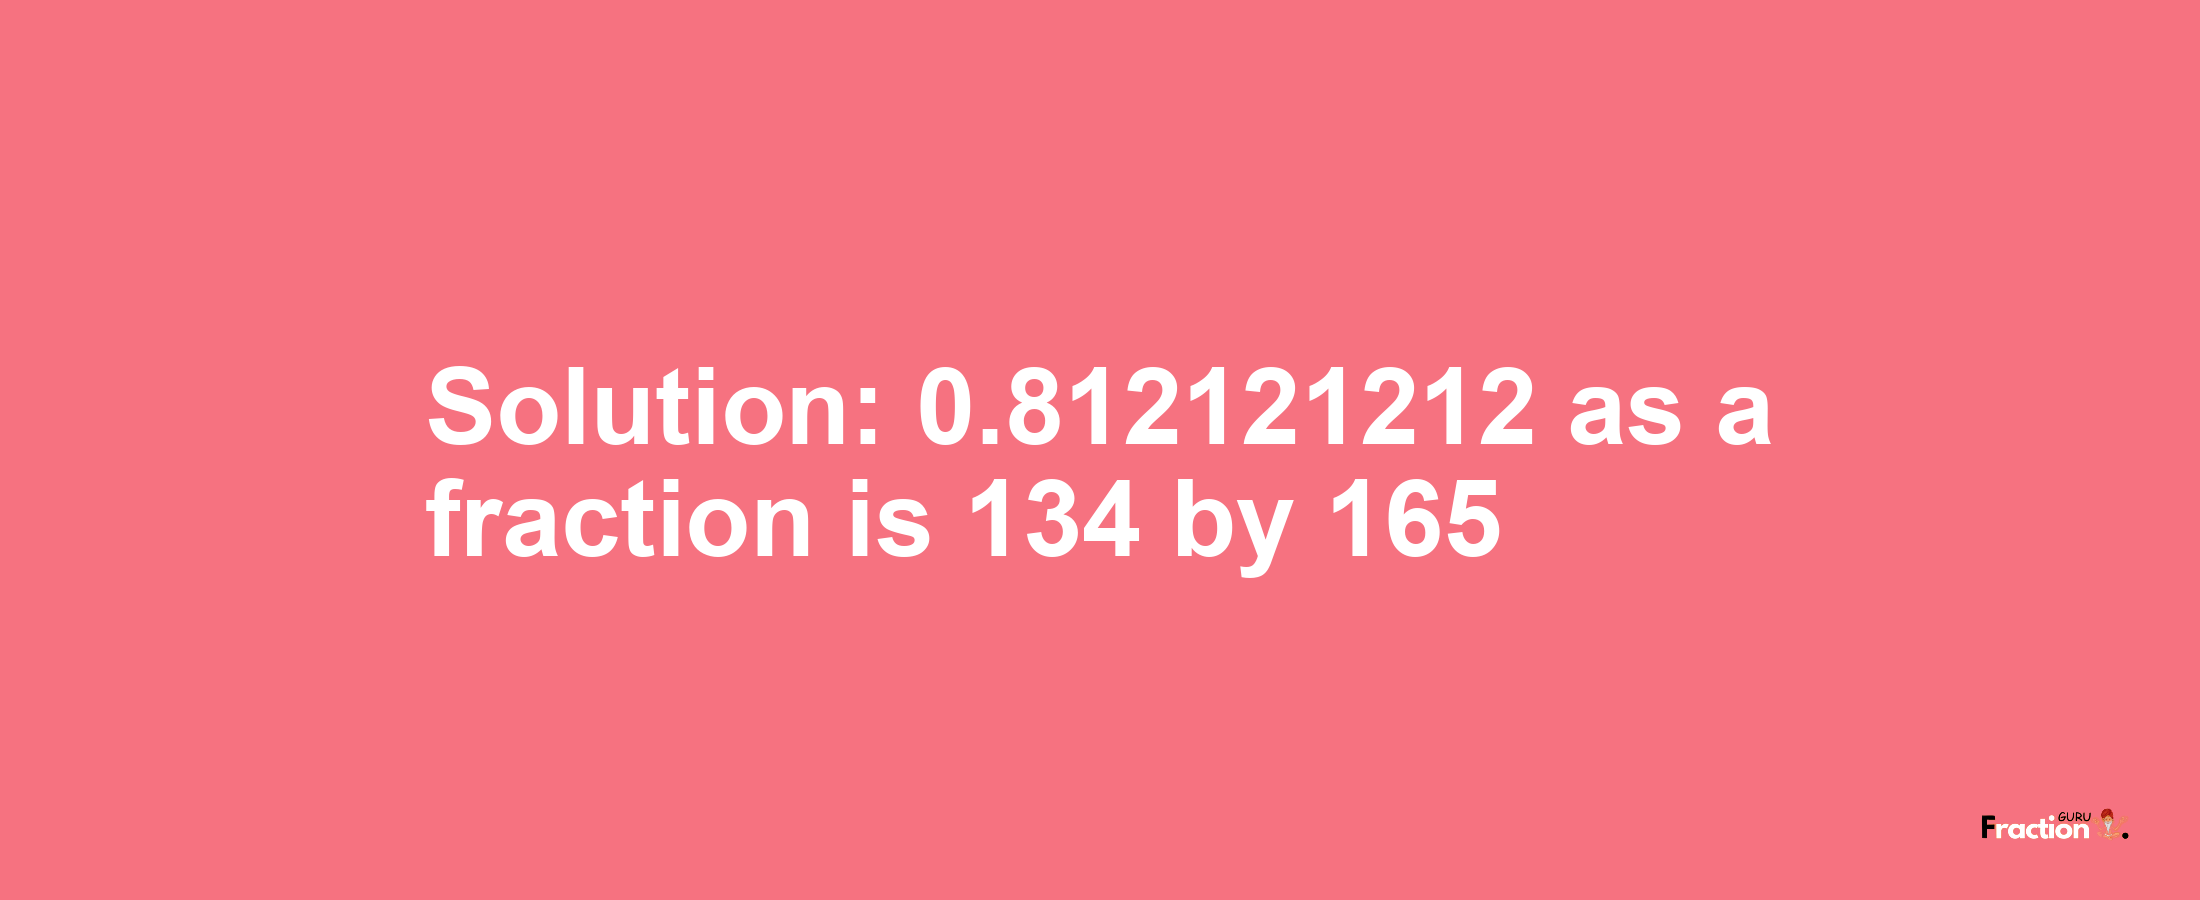 Solution:0.812121212 as a fraction is 134/165